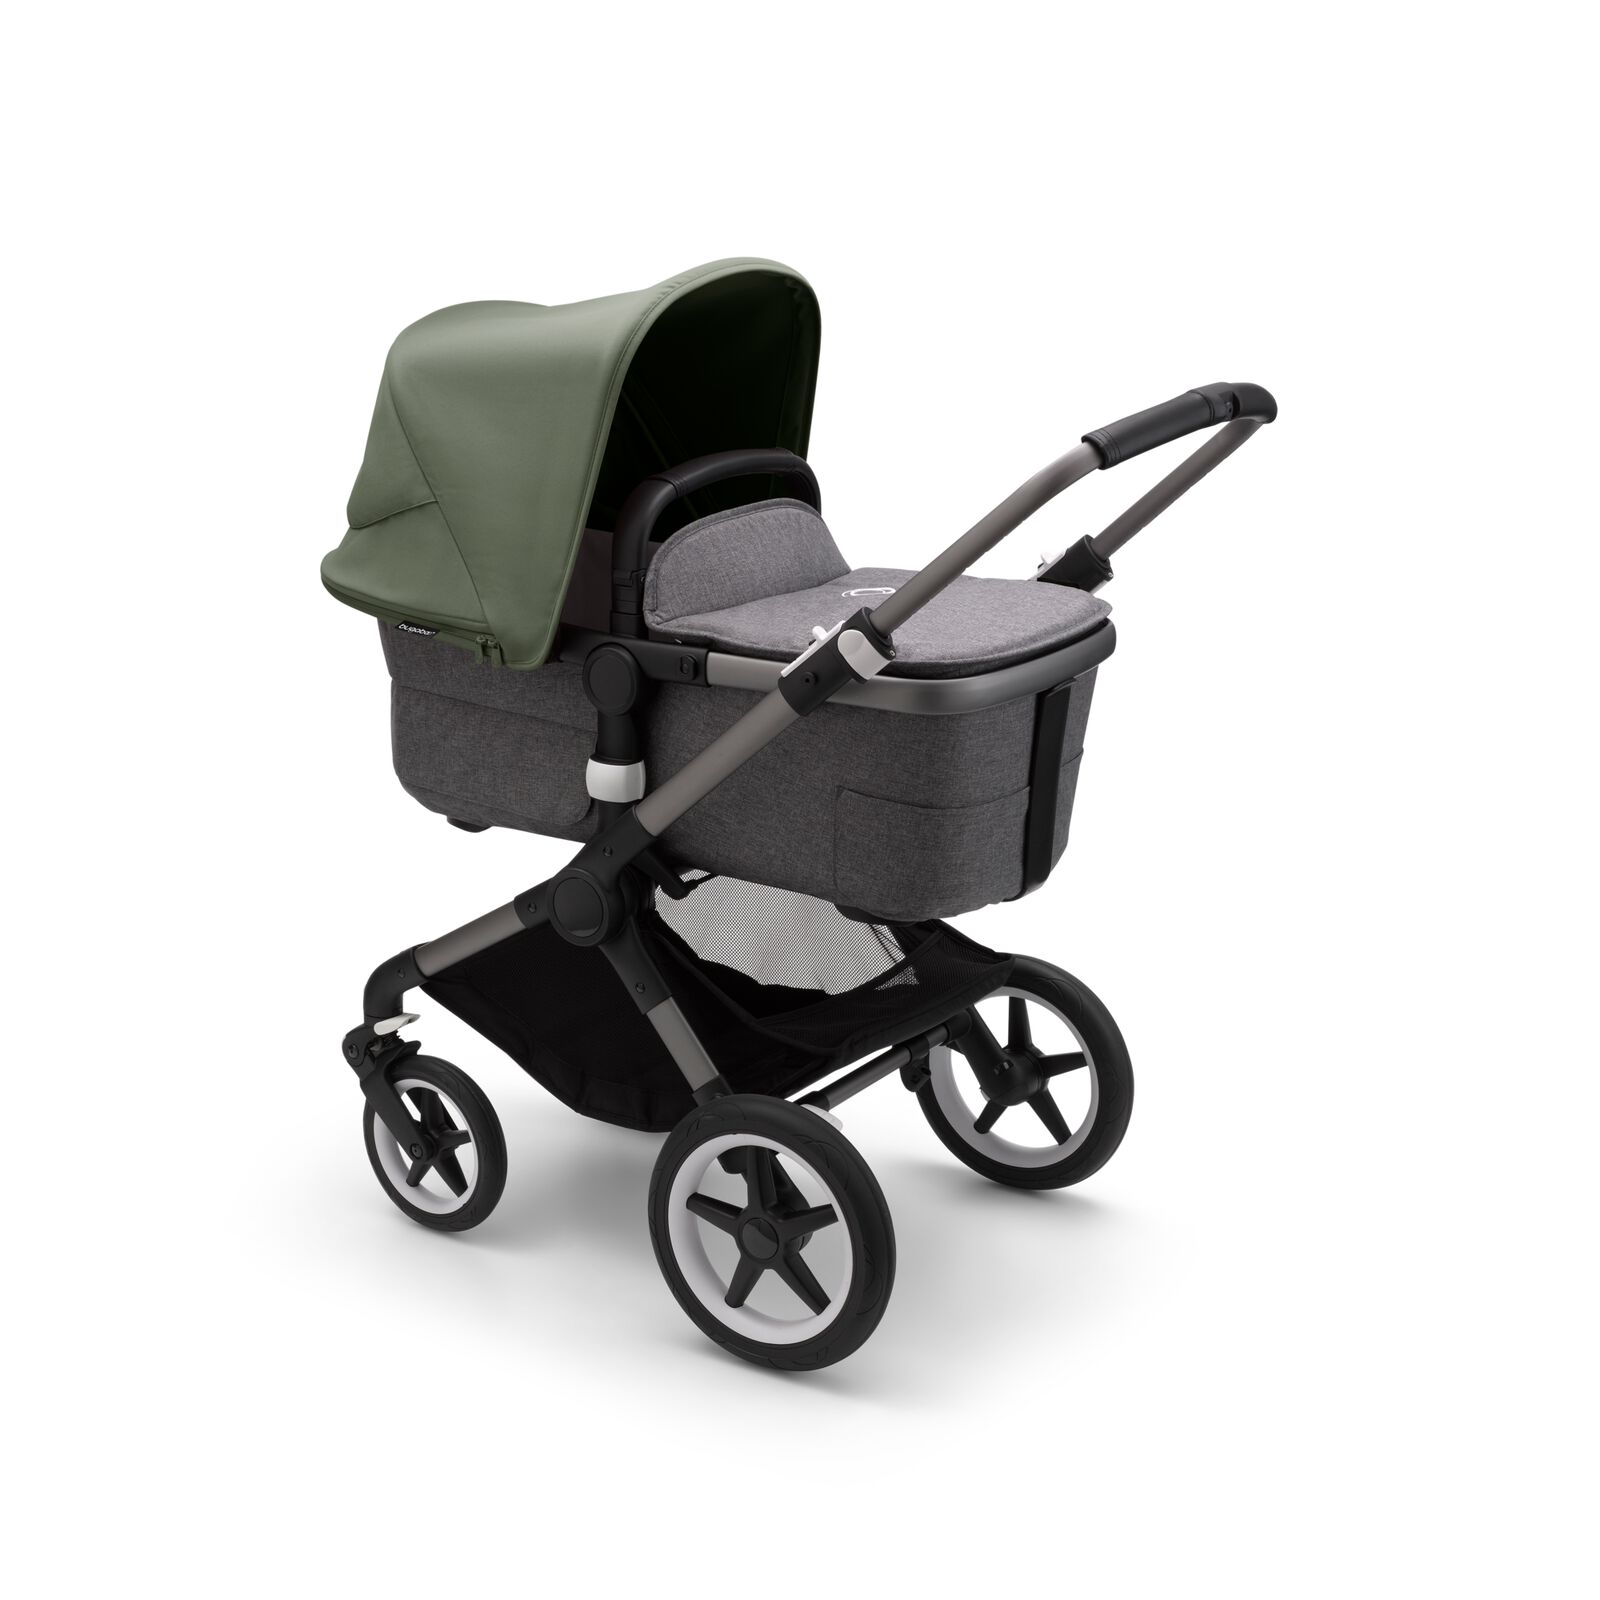 Bugaboo Fox 3 bassinet stroller with graphite frame, grey melange fabrics, and forest green sun canopy.